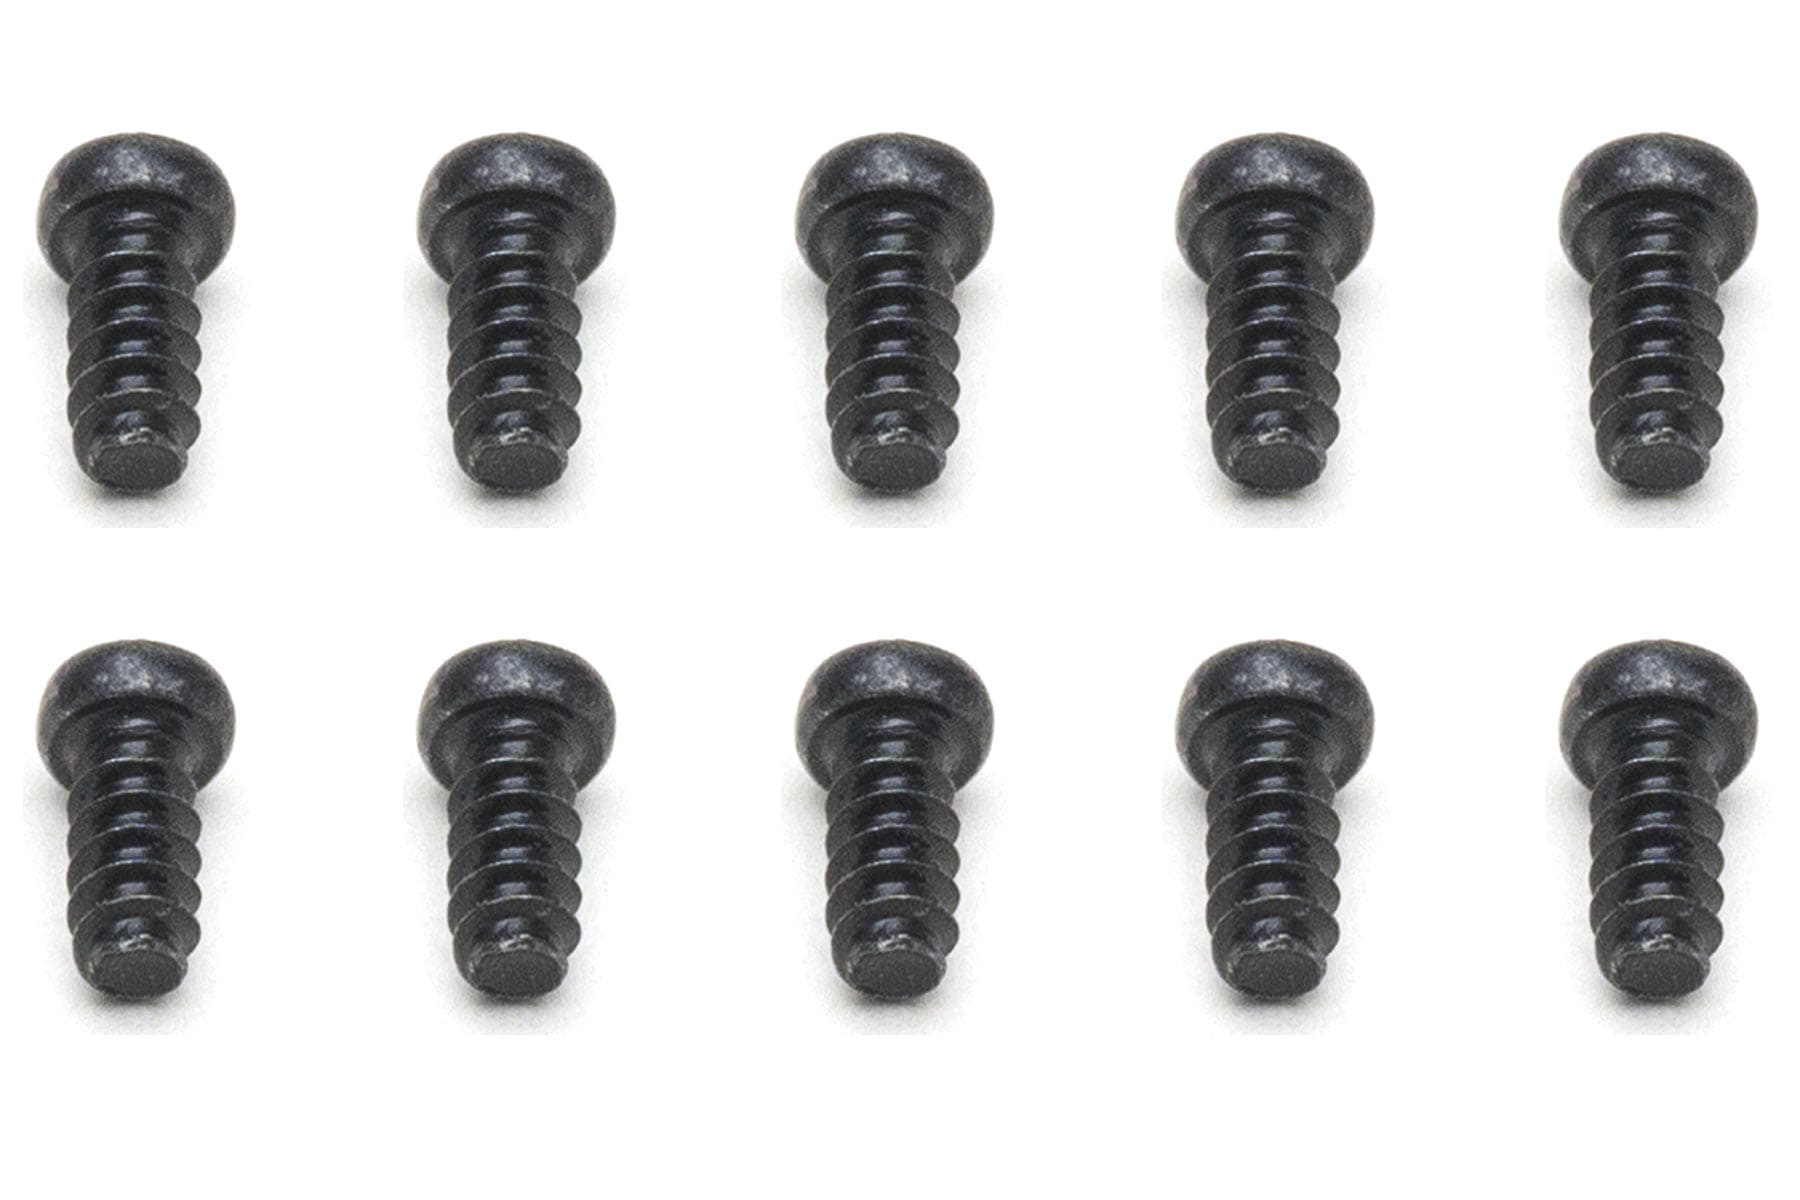 XK 1/18 Scale High Speed Truck 2.6x6mm Self-tapping Screw with Circle Head (10 pcs) WLT-A949-38